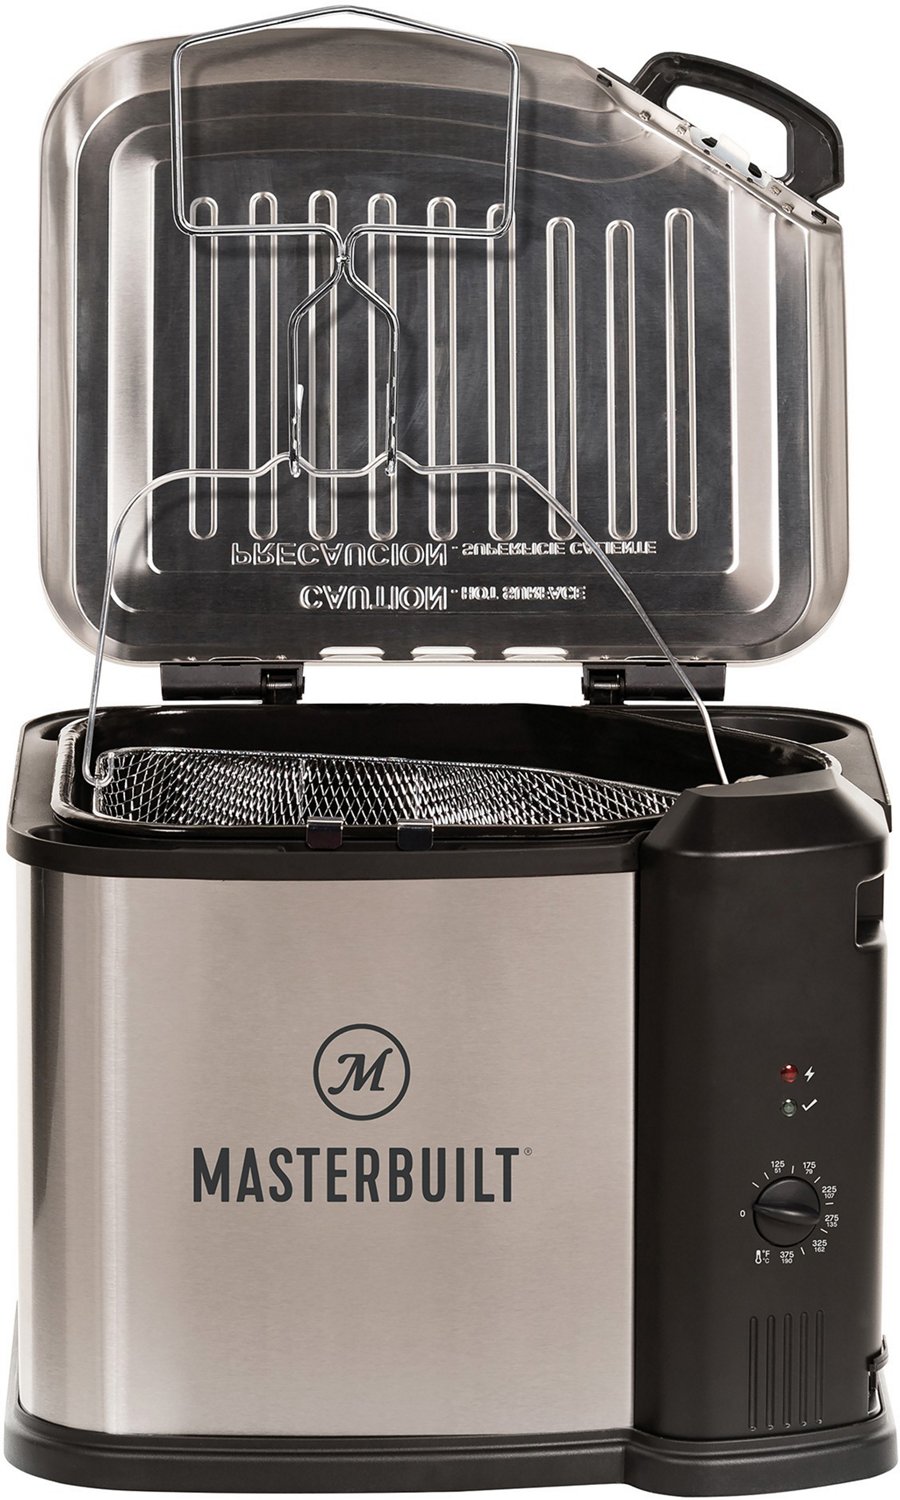 Masterbuilt electric turkey fryer and seafood kettle powers on.6a